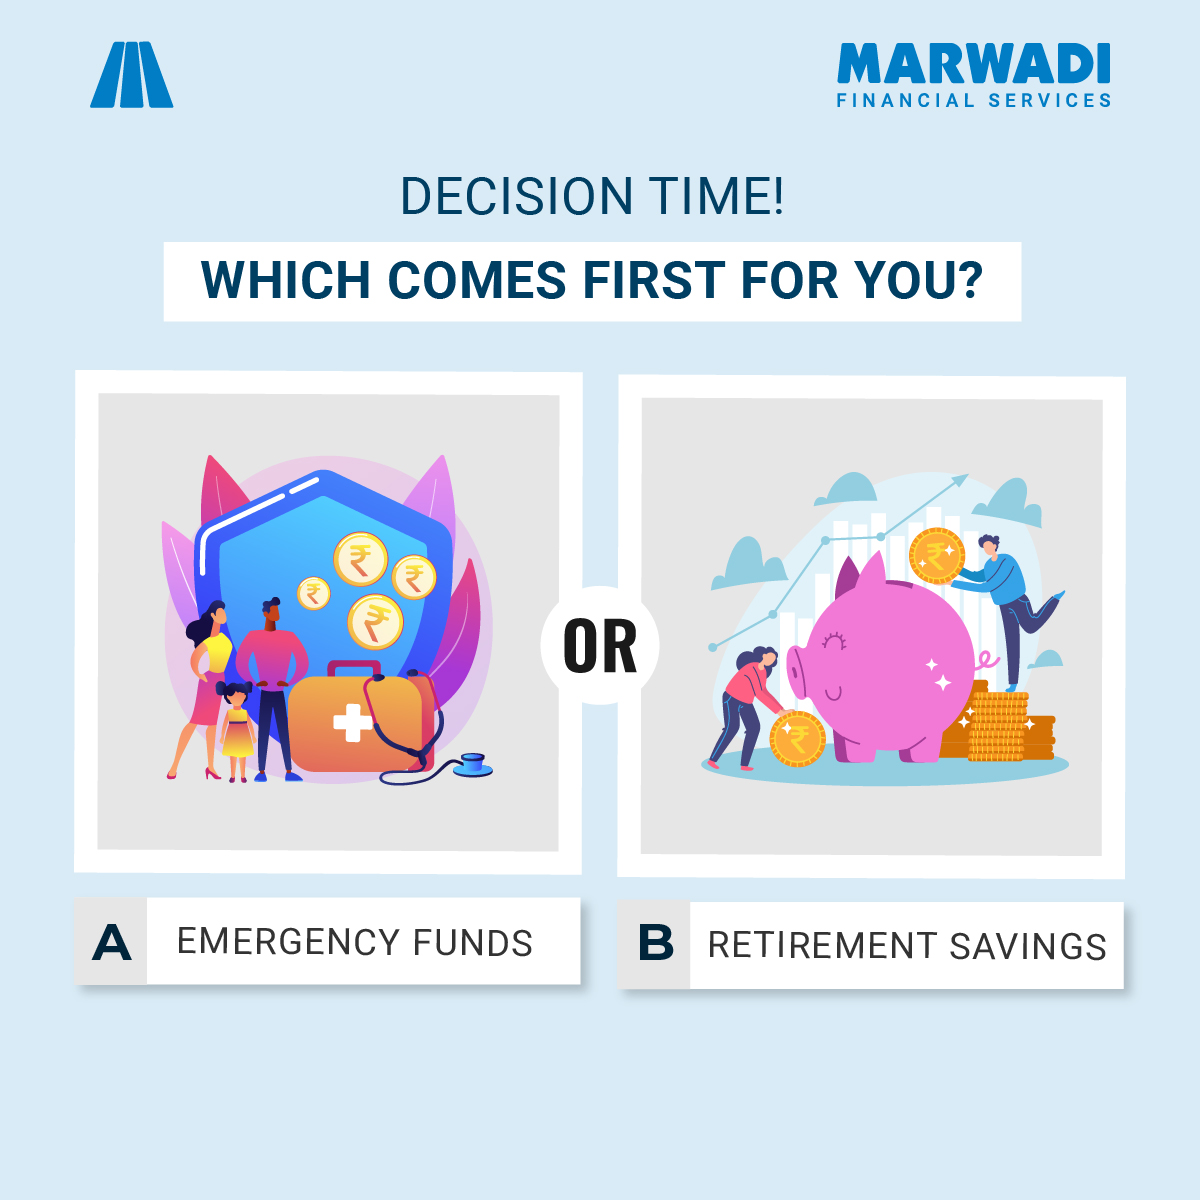 Can't decide between Emergency Funds or Retirement Planning? 
. 
. 
Let's hear your thoughts! Comment 'Emergency,' 'Retirement,' or 'Both' below! 

#emergencyfunds #retirement #retirementplanning #retirementgoals #choosewisely #investor  #stockmarkets #MSFL #MSFLHQ #MarwadiHQ